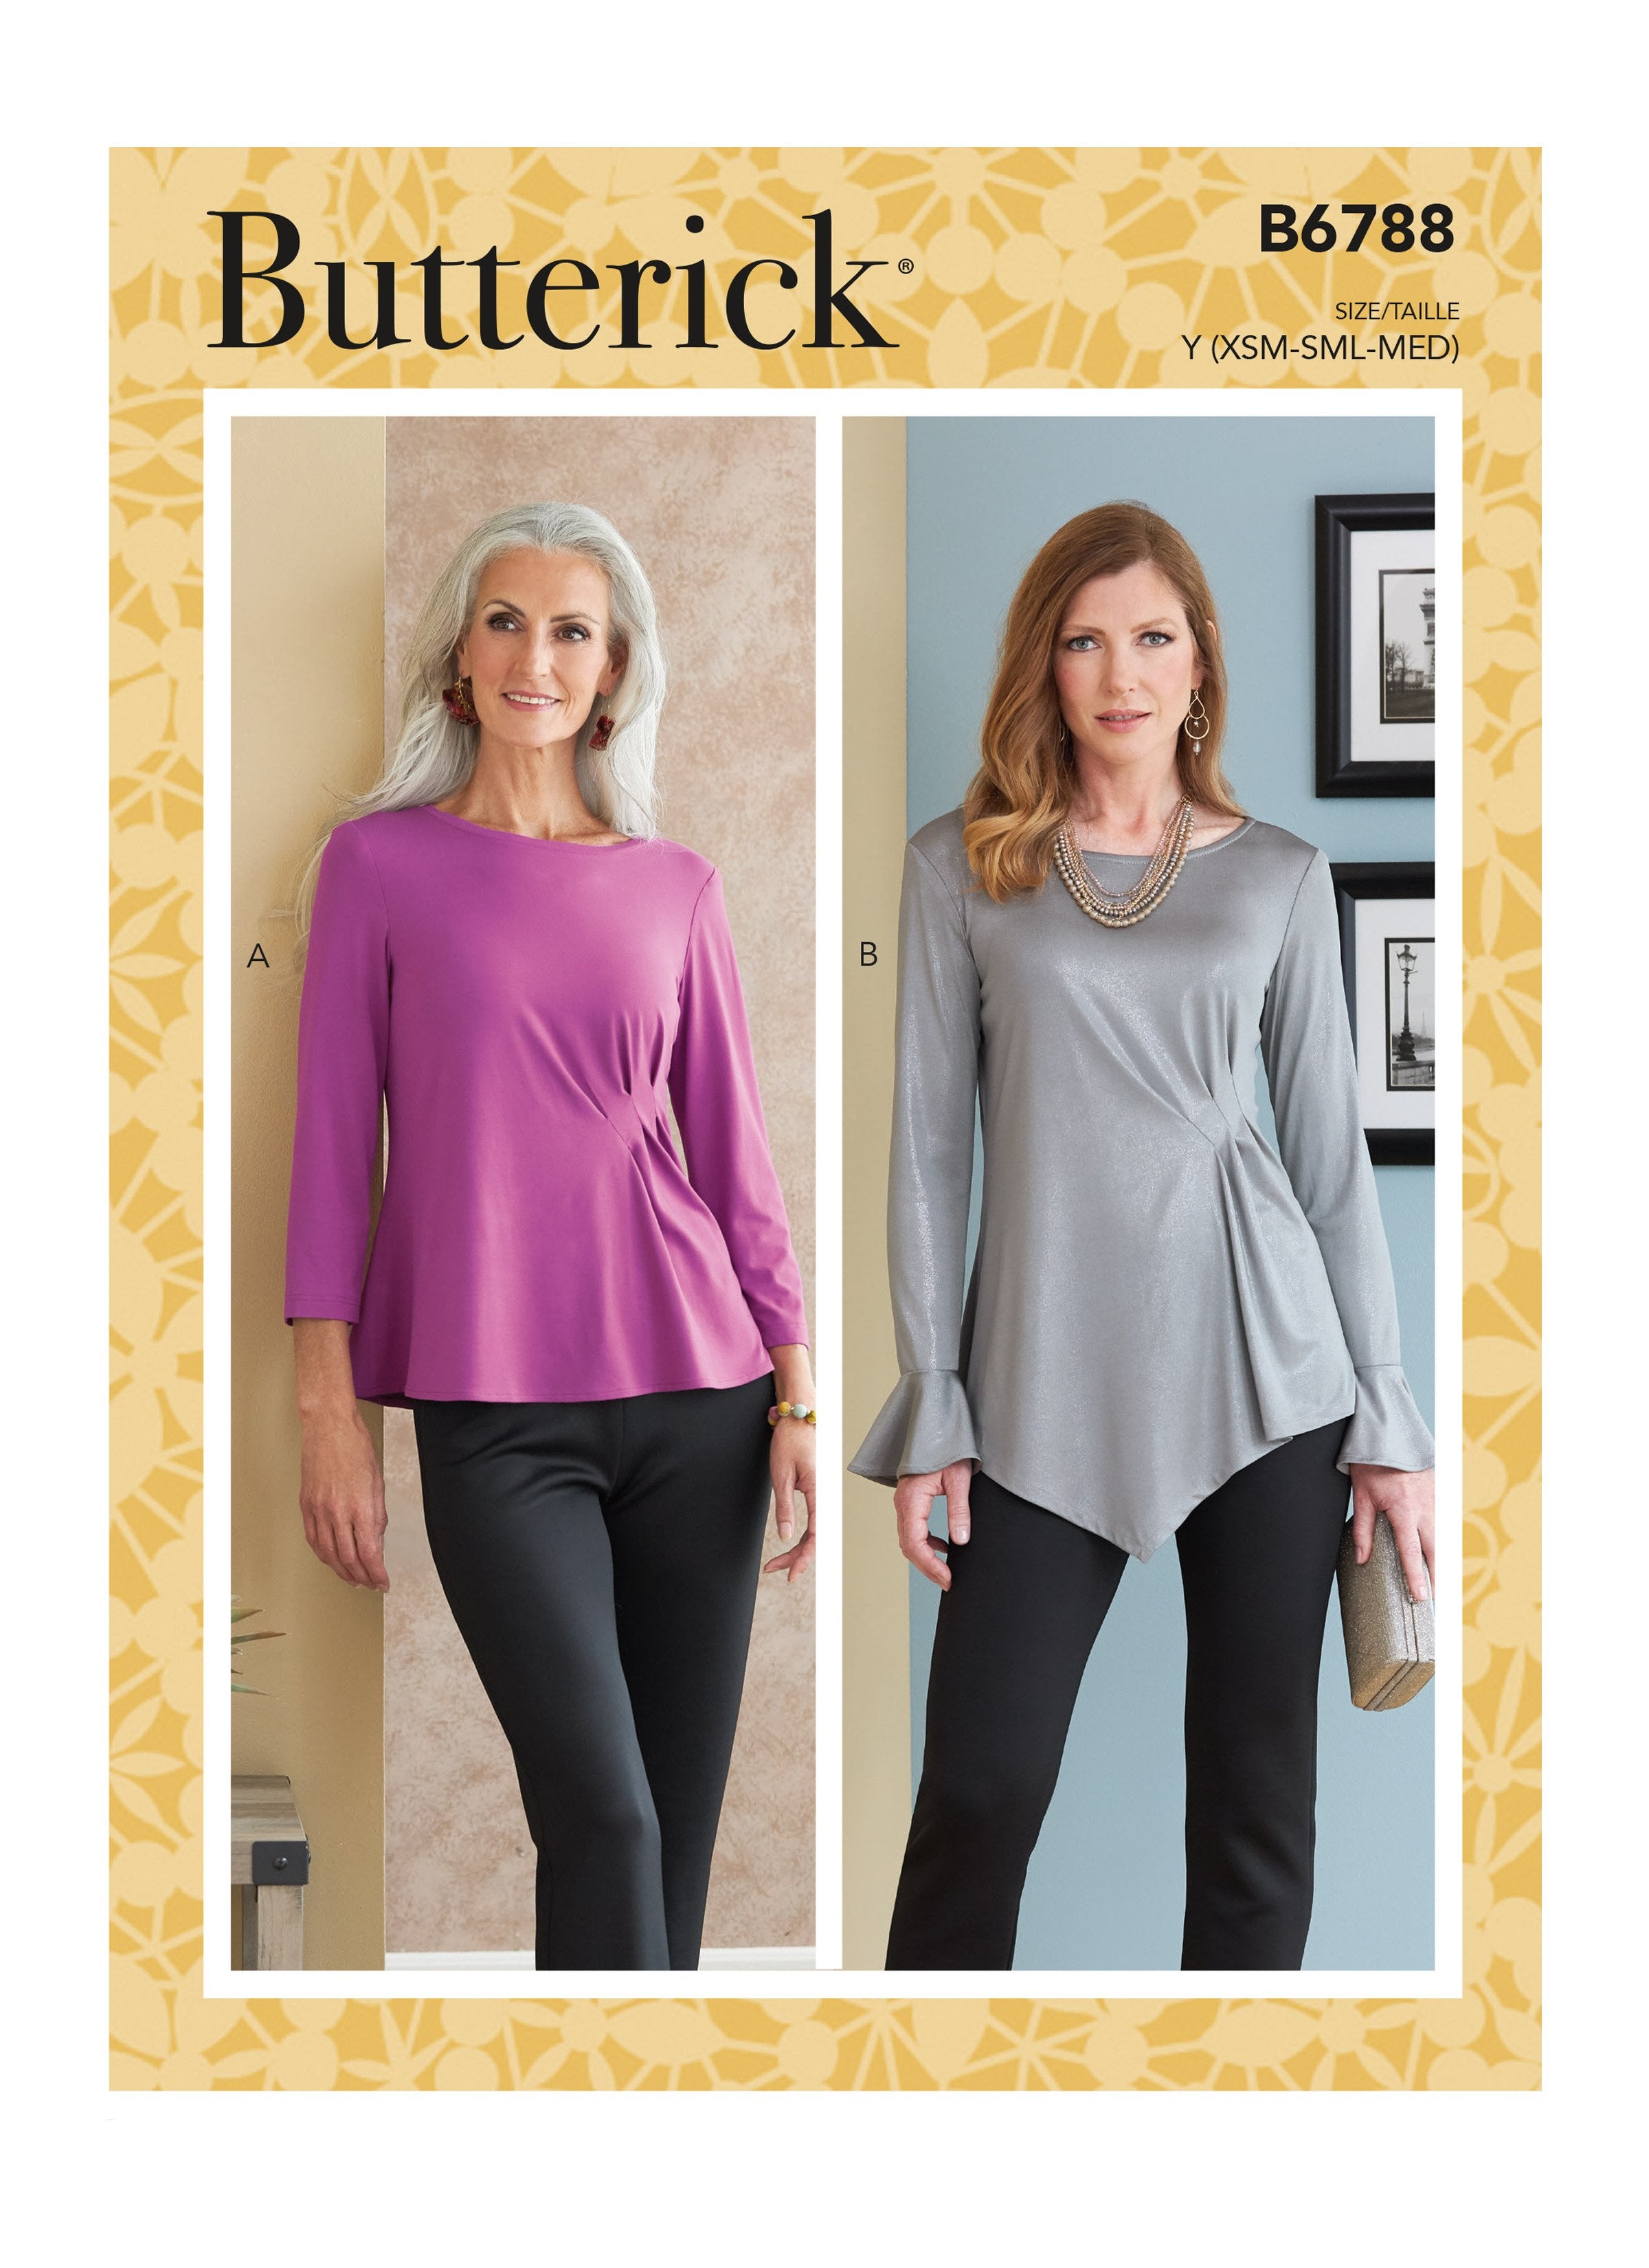 Butterick 6788 Misses' Tops sewing pattern from Jaycotts Sewing Supplies